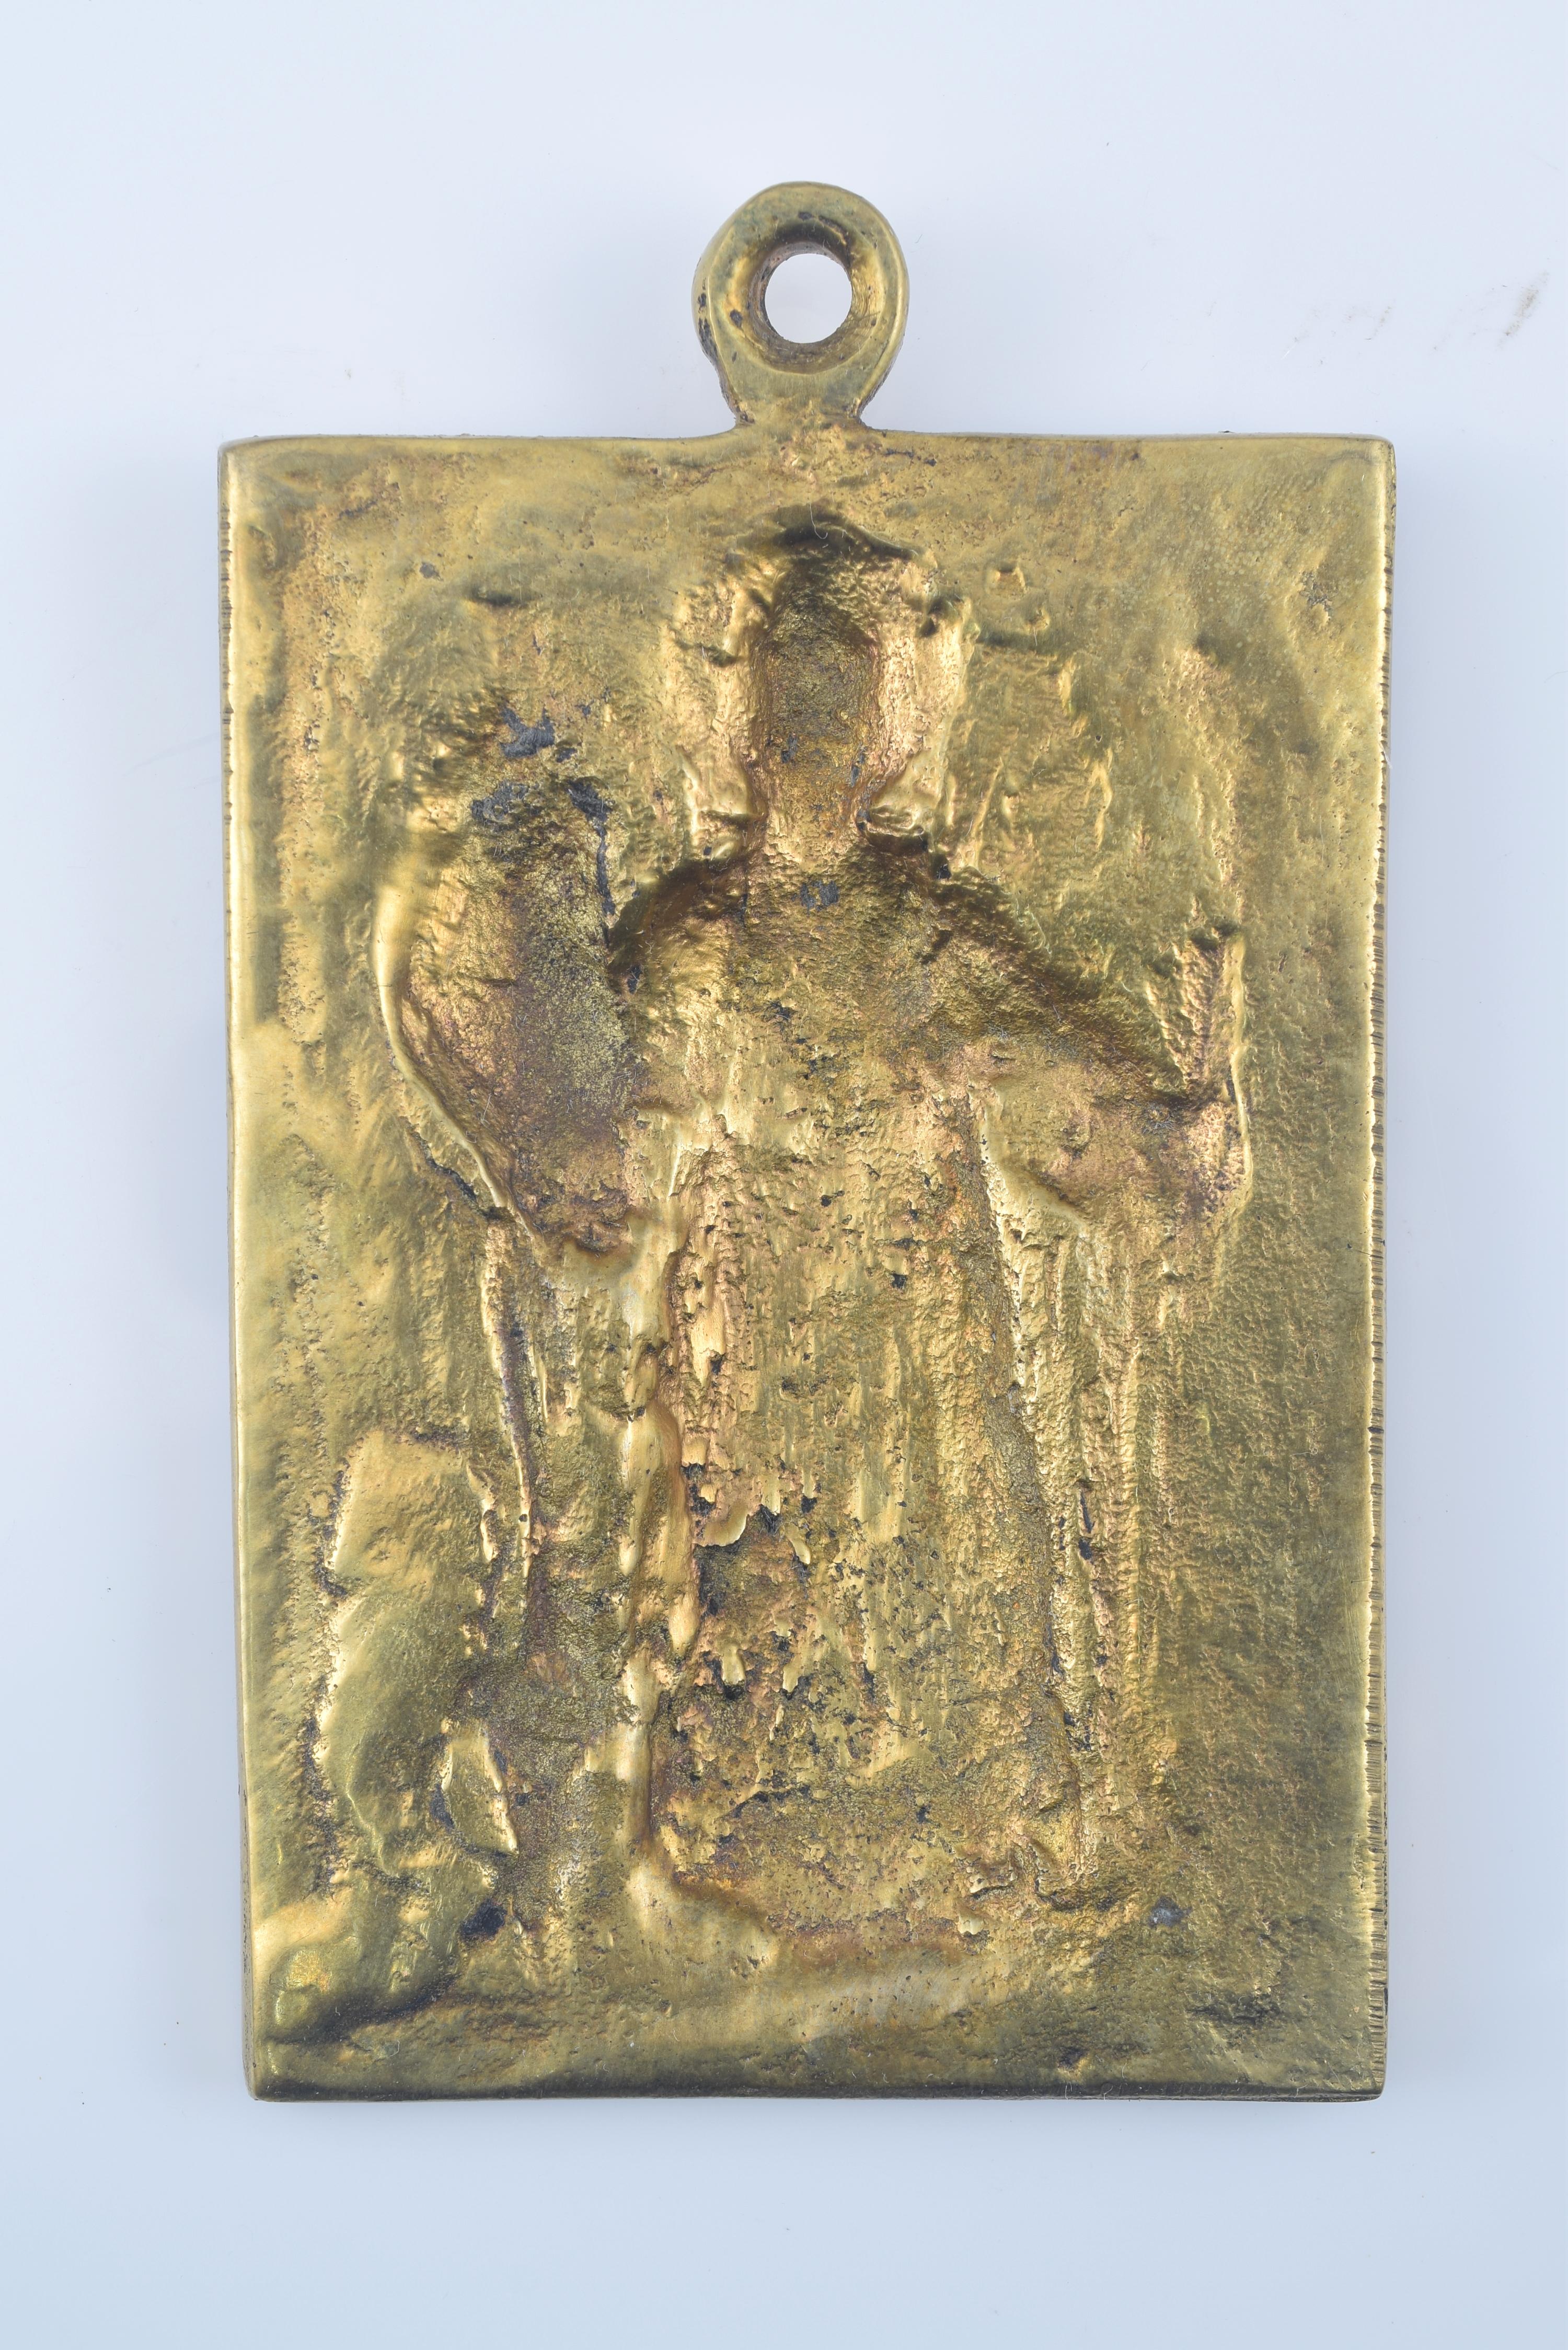 Devotional plaque, San Telmo or Sanct'Elmo. Bronze. Spanish school, 19th century. 
Saint Pedro González became bishop of Palencia, later entering the Order of Preachers. He is known as Saint Elmo and is considered the patron saint of sailors, having